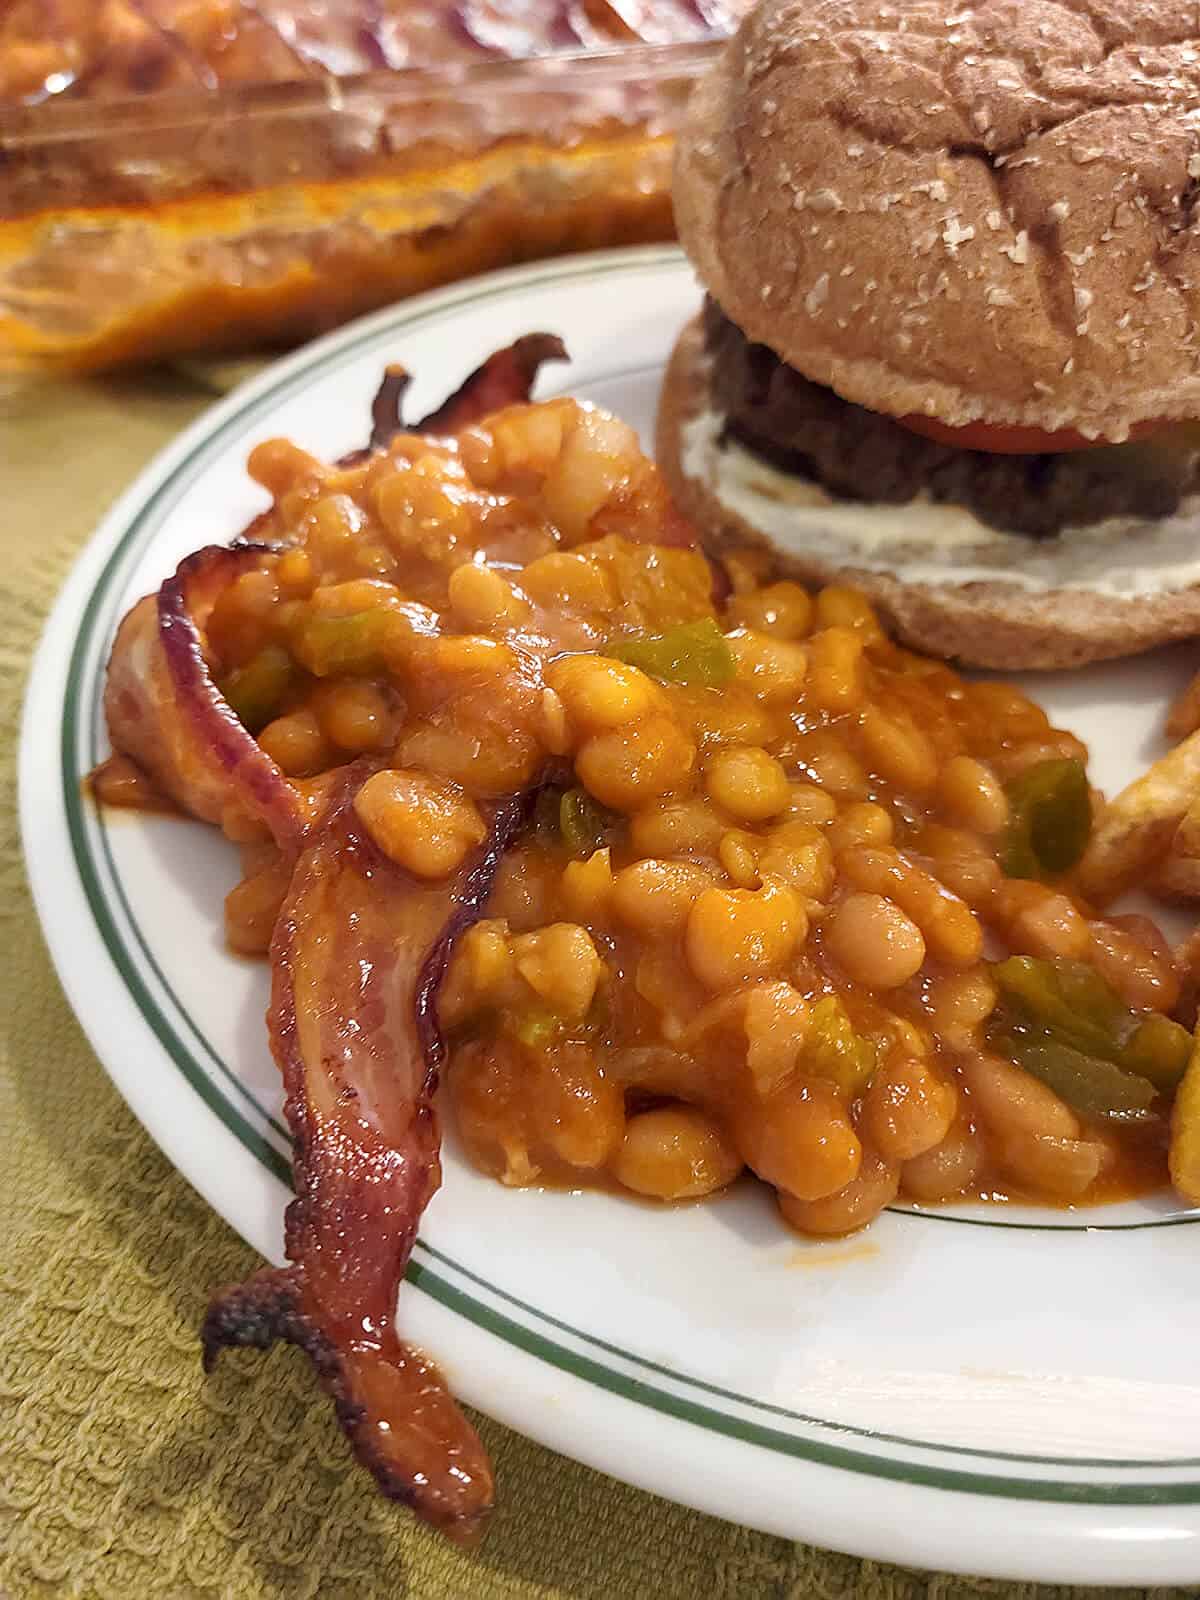 Baked beans and bacon on a plate with a hamburger.